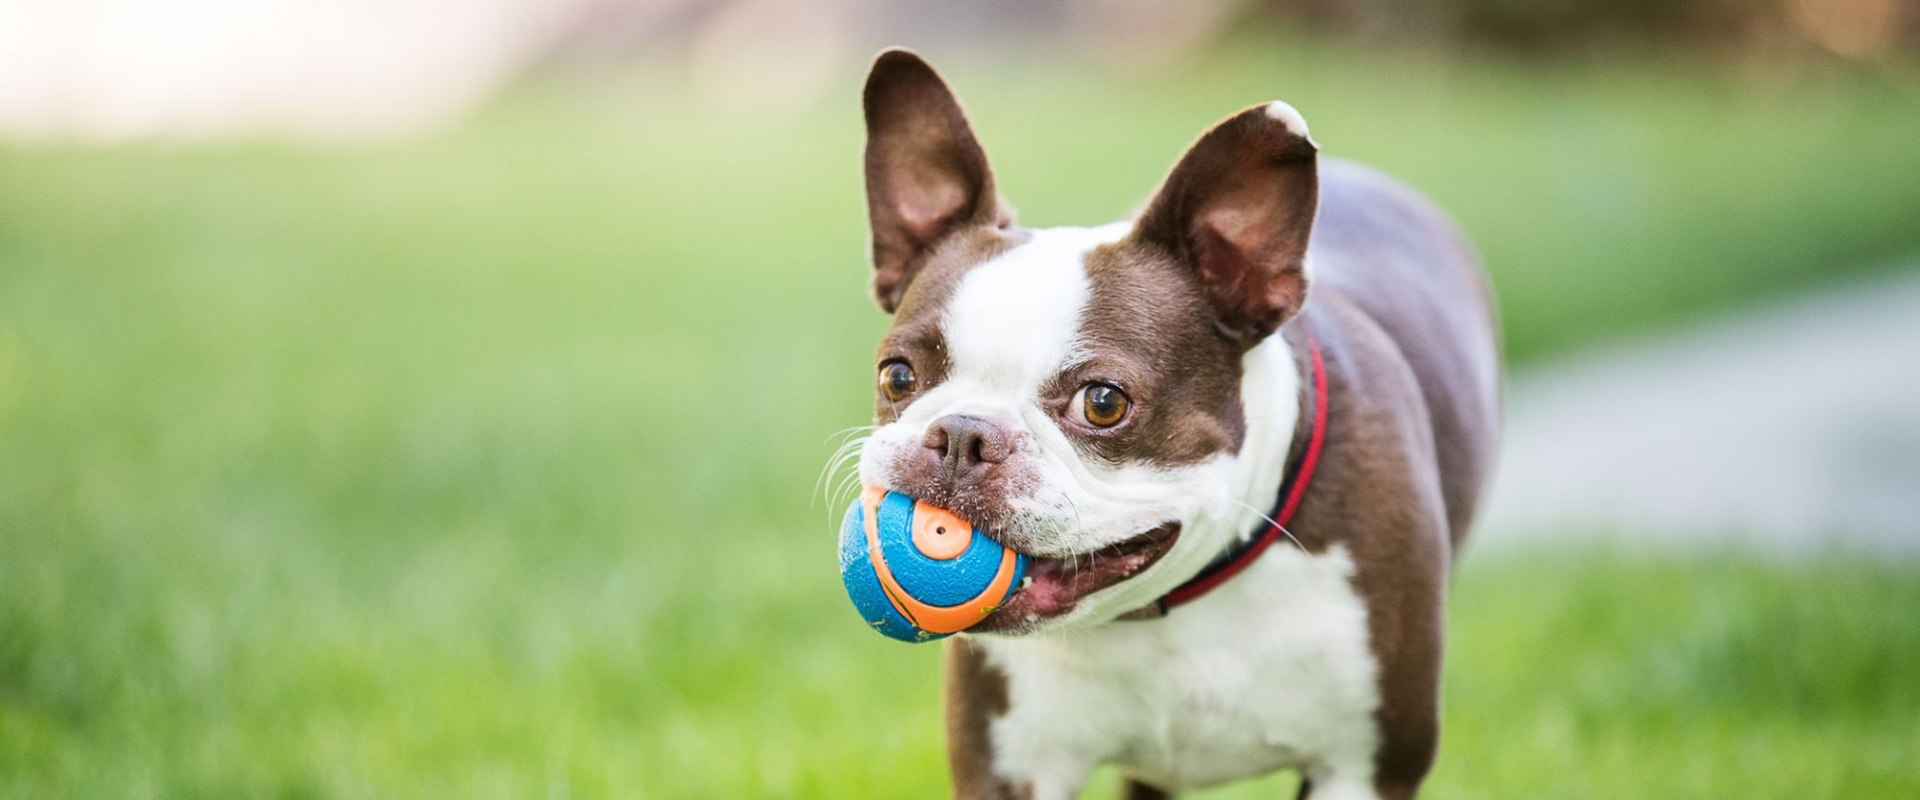 Does Your Pet Need More Mental Stimulation or Enrichment Activities?